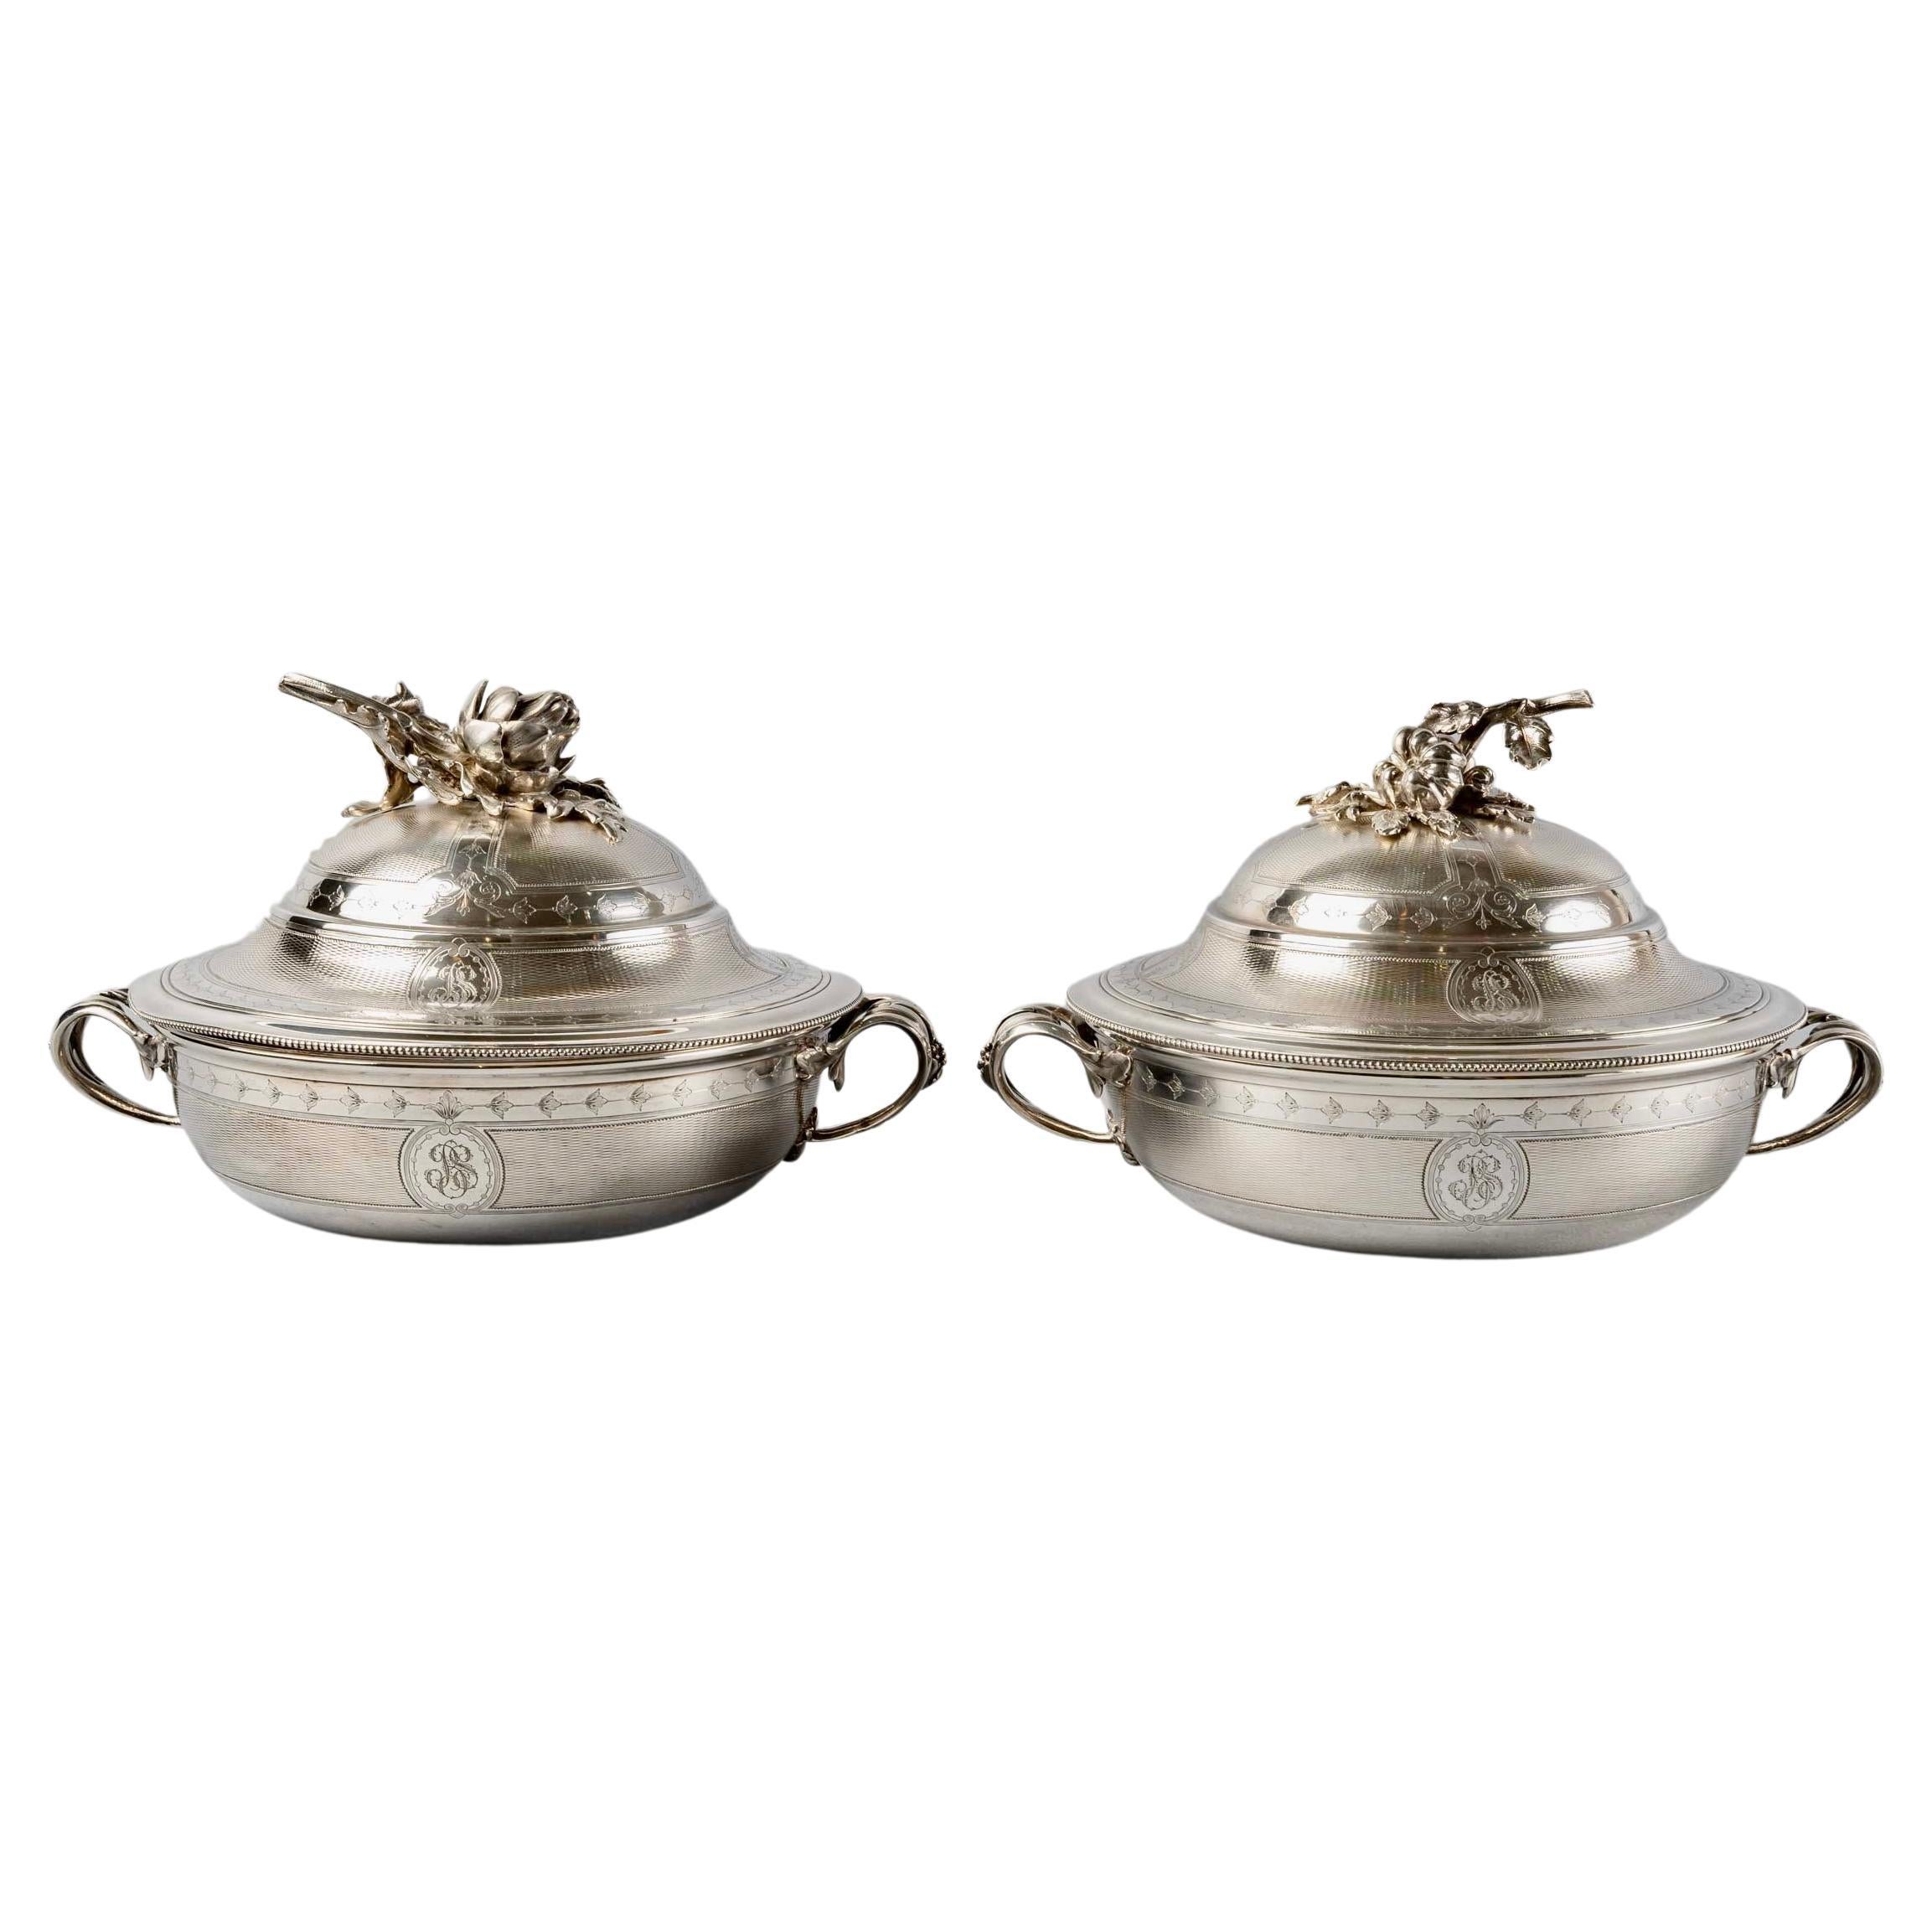 Christofle, Pair of Tureens Guilloche Sterling Silver Artichoke Handle